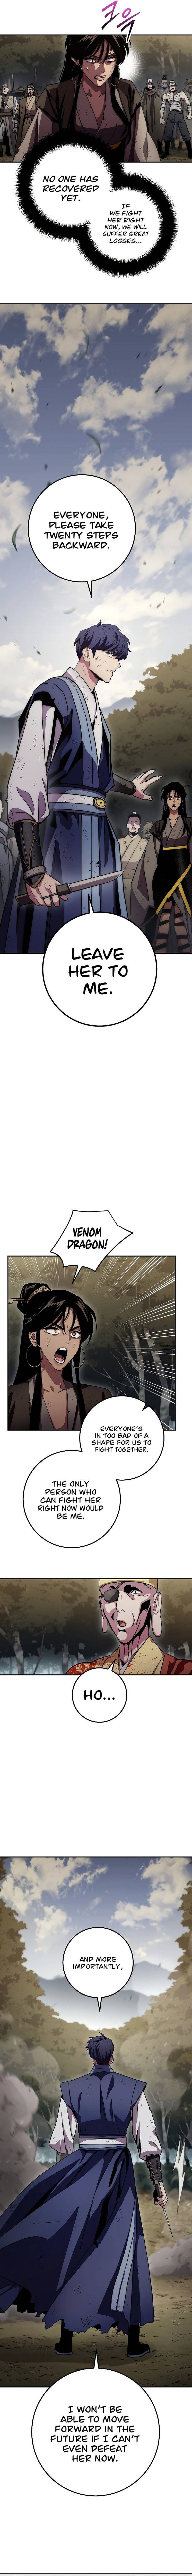 Legend Of Asura - The Venom Dragon Chapter 130 page 3